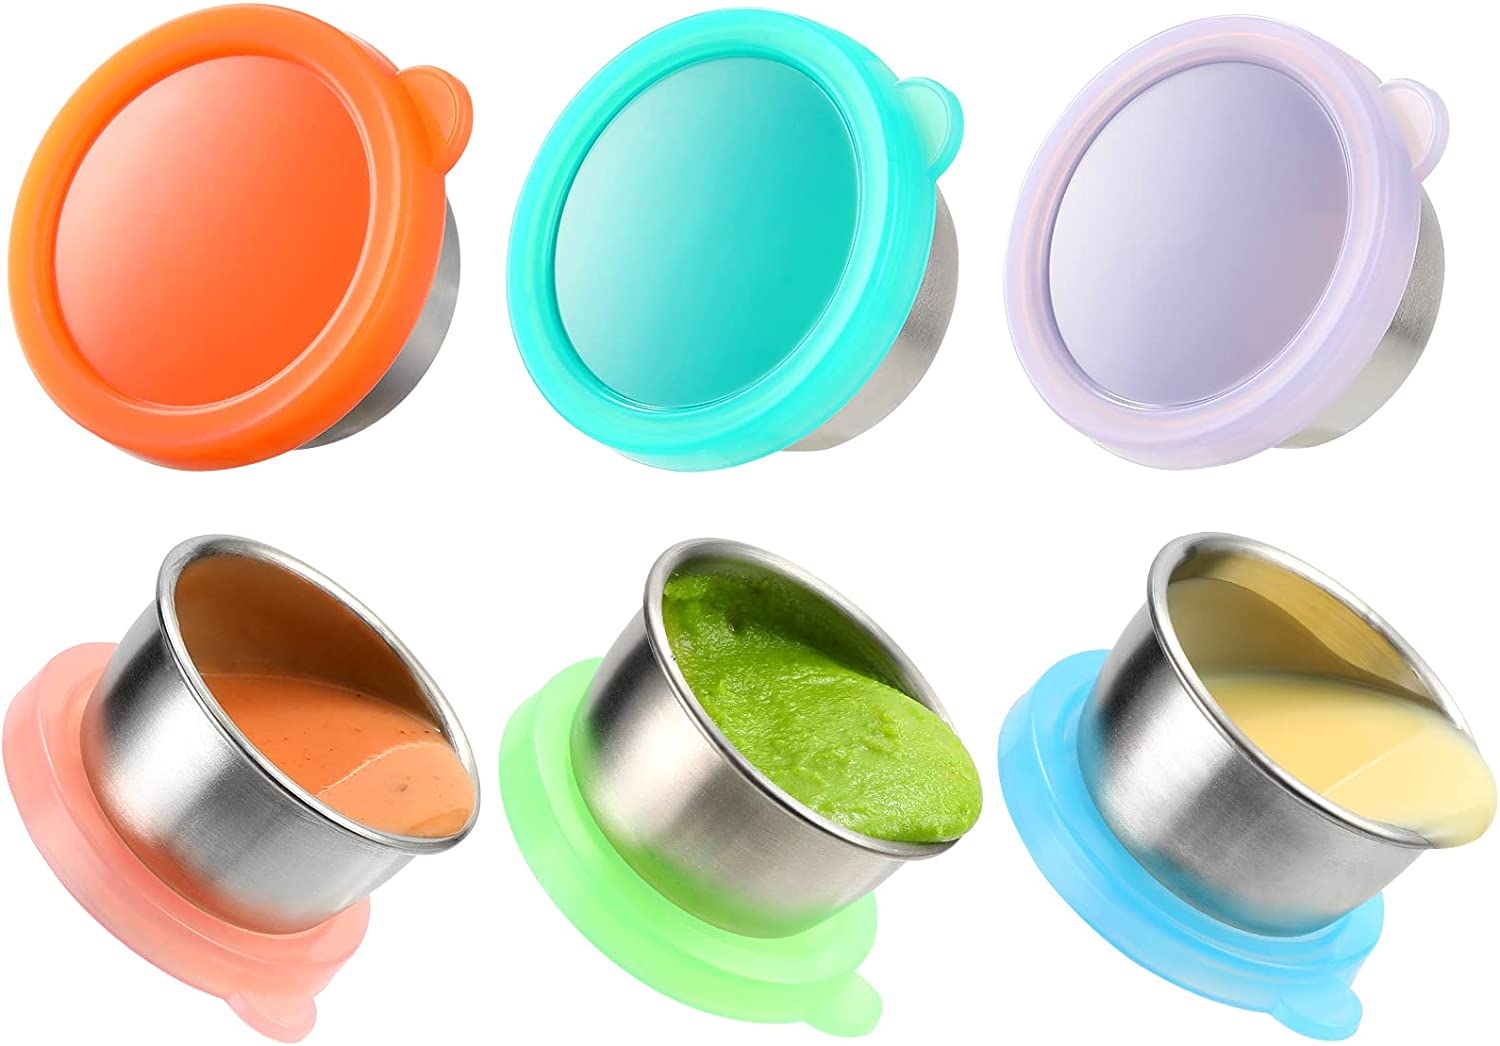 Condiment Cups container with Lids- 8 pk. 3 oz.Salad Dressing Container to  go Small Food Storage Containers with Lids- Sauce Cups Leak proof Reusable